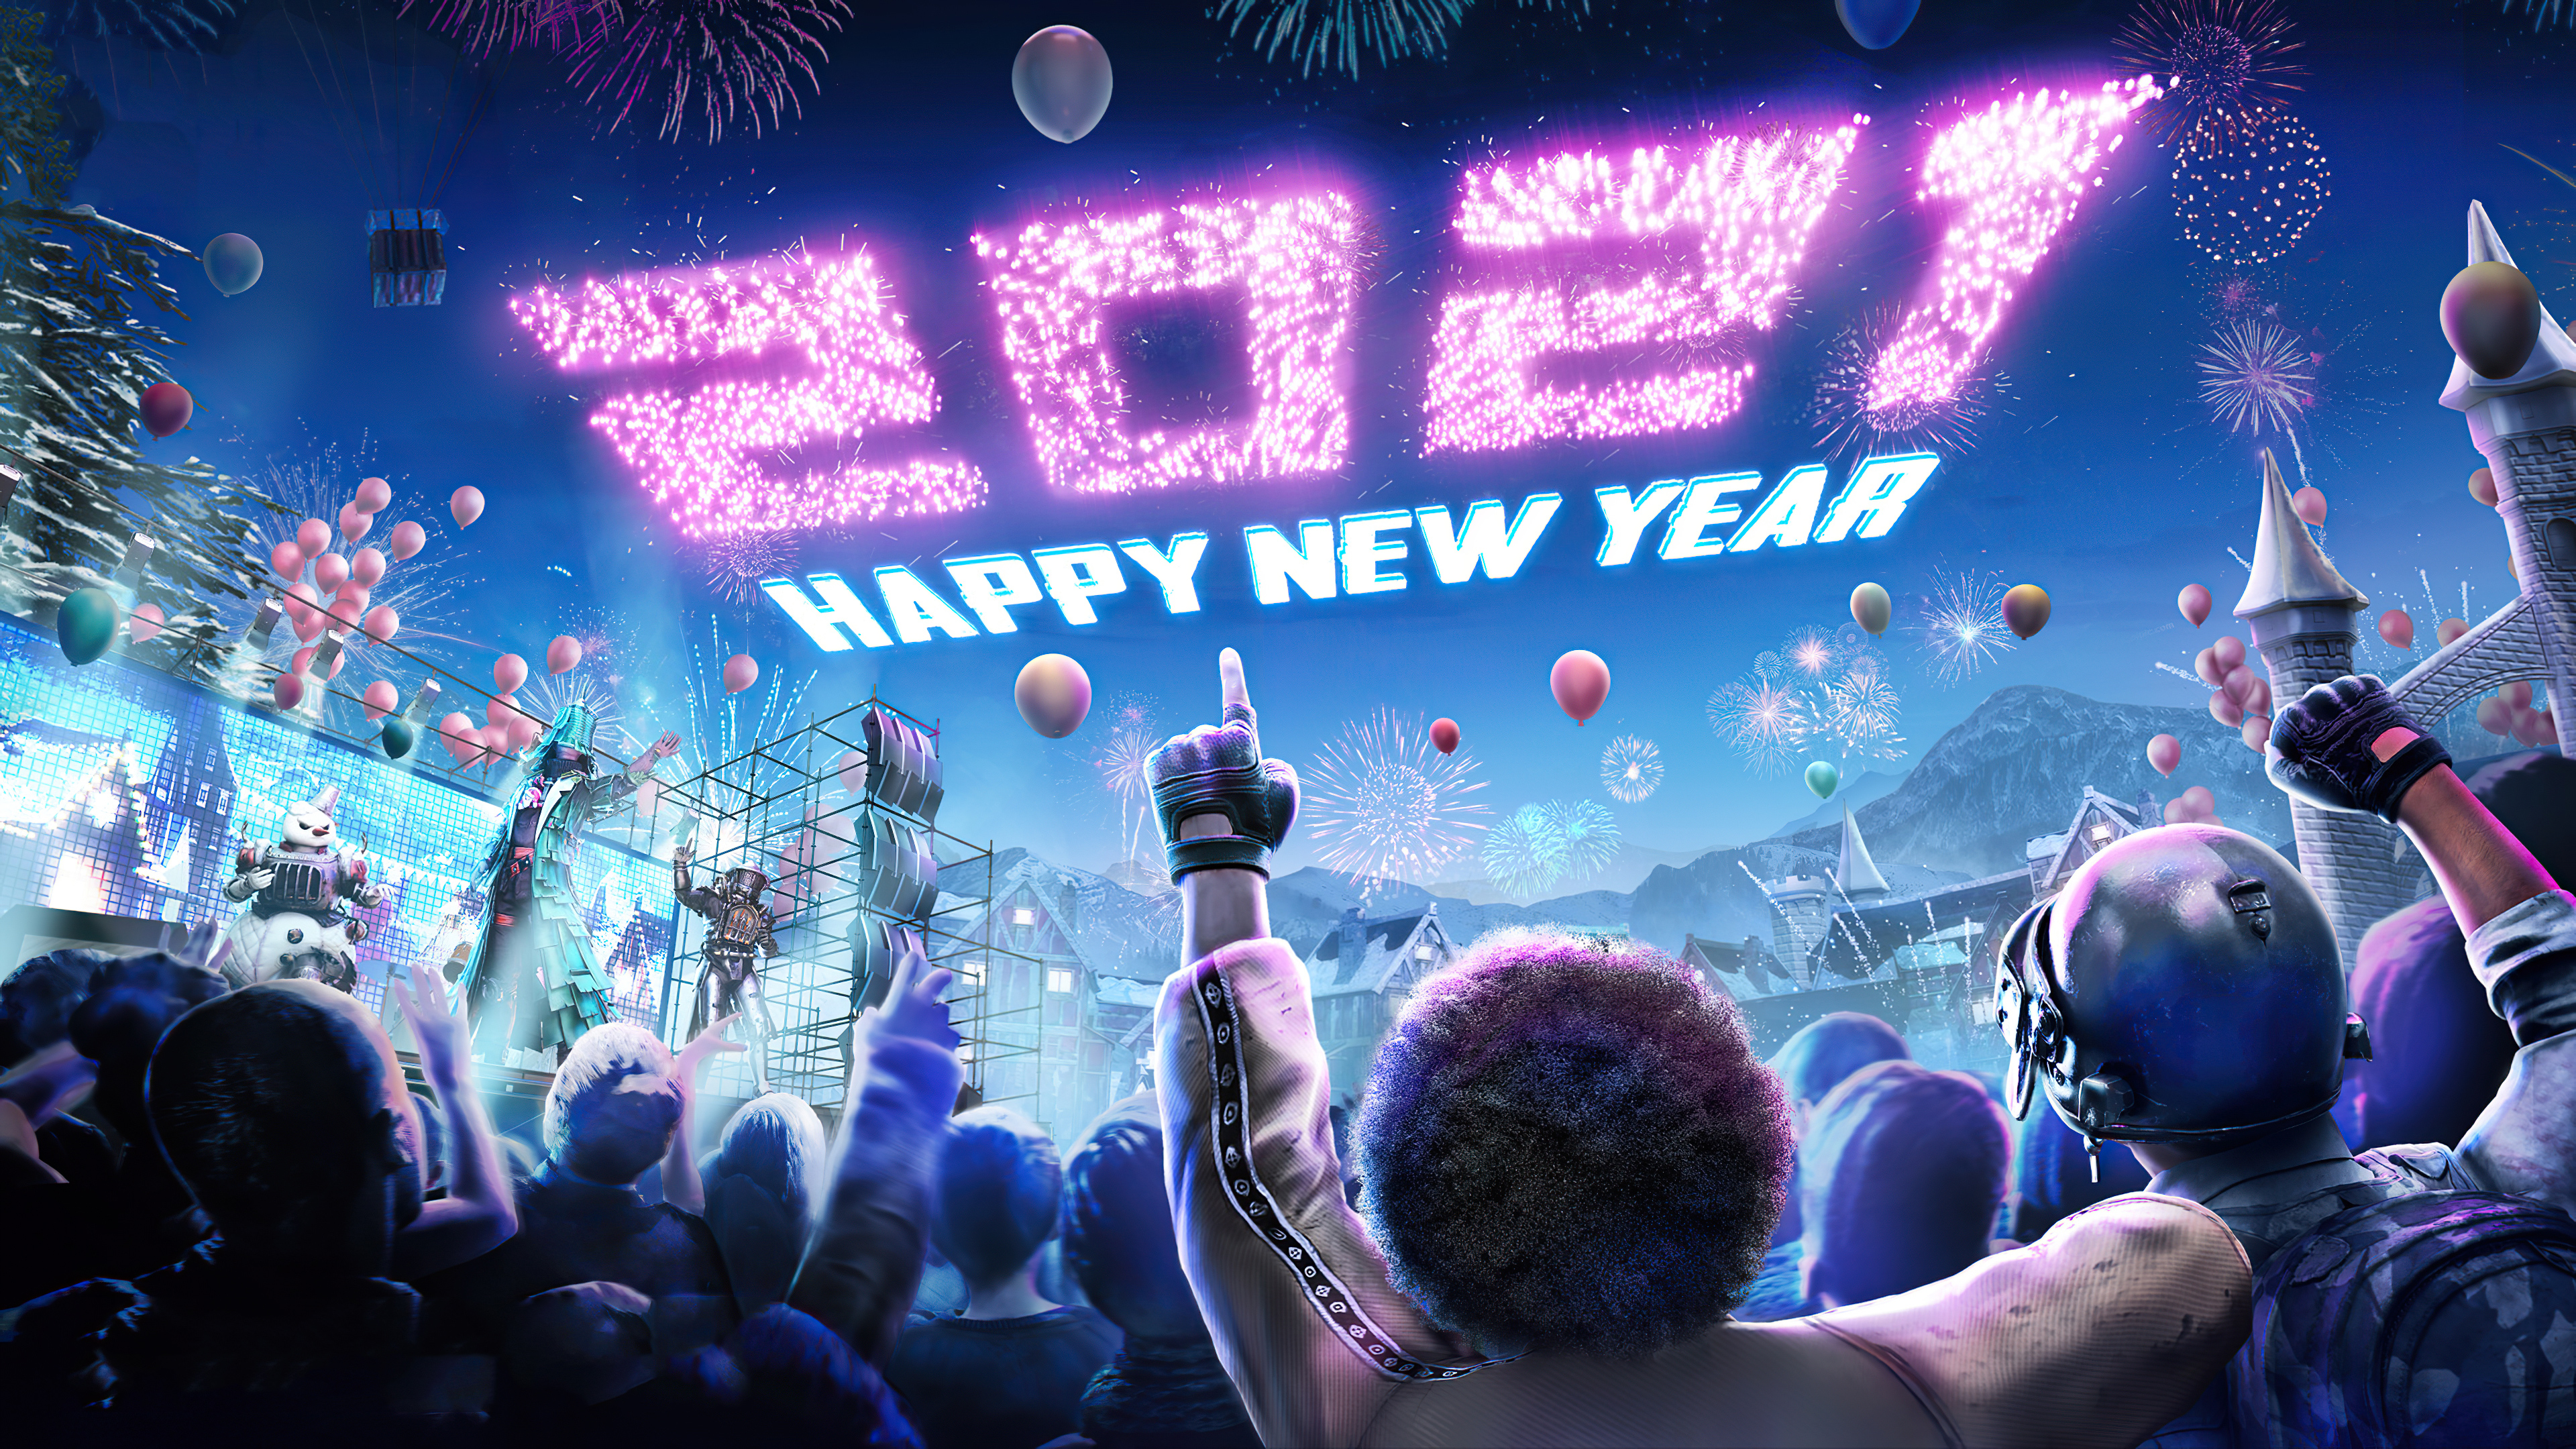 4K New Year 2021 Wallpapers | Background Images